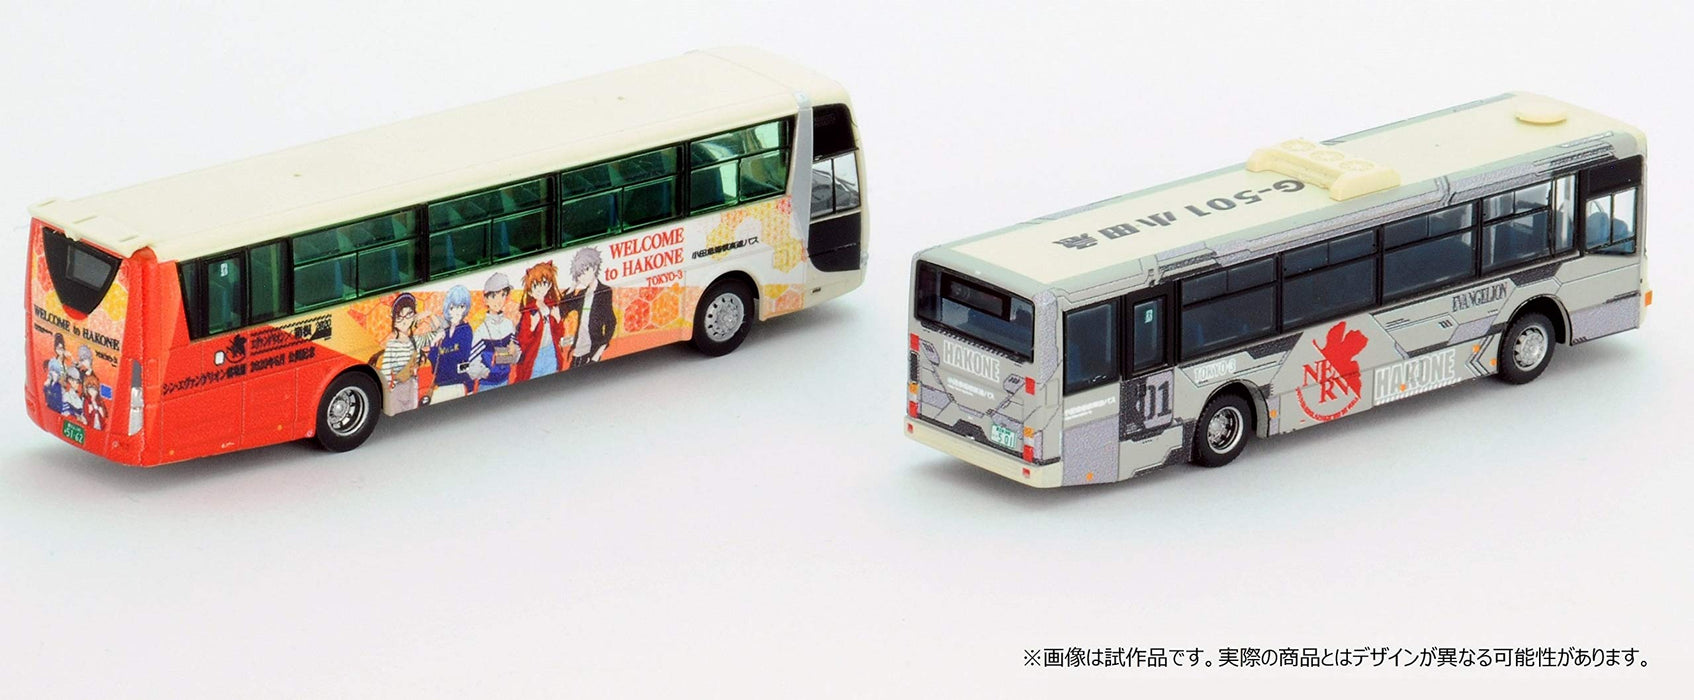 Tomytec Bus Collection - Odakyu Hakone Highway Bus Evangelion Wrapping Set of 2 Limited Edition